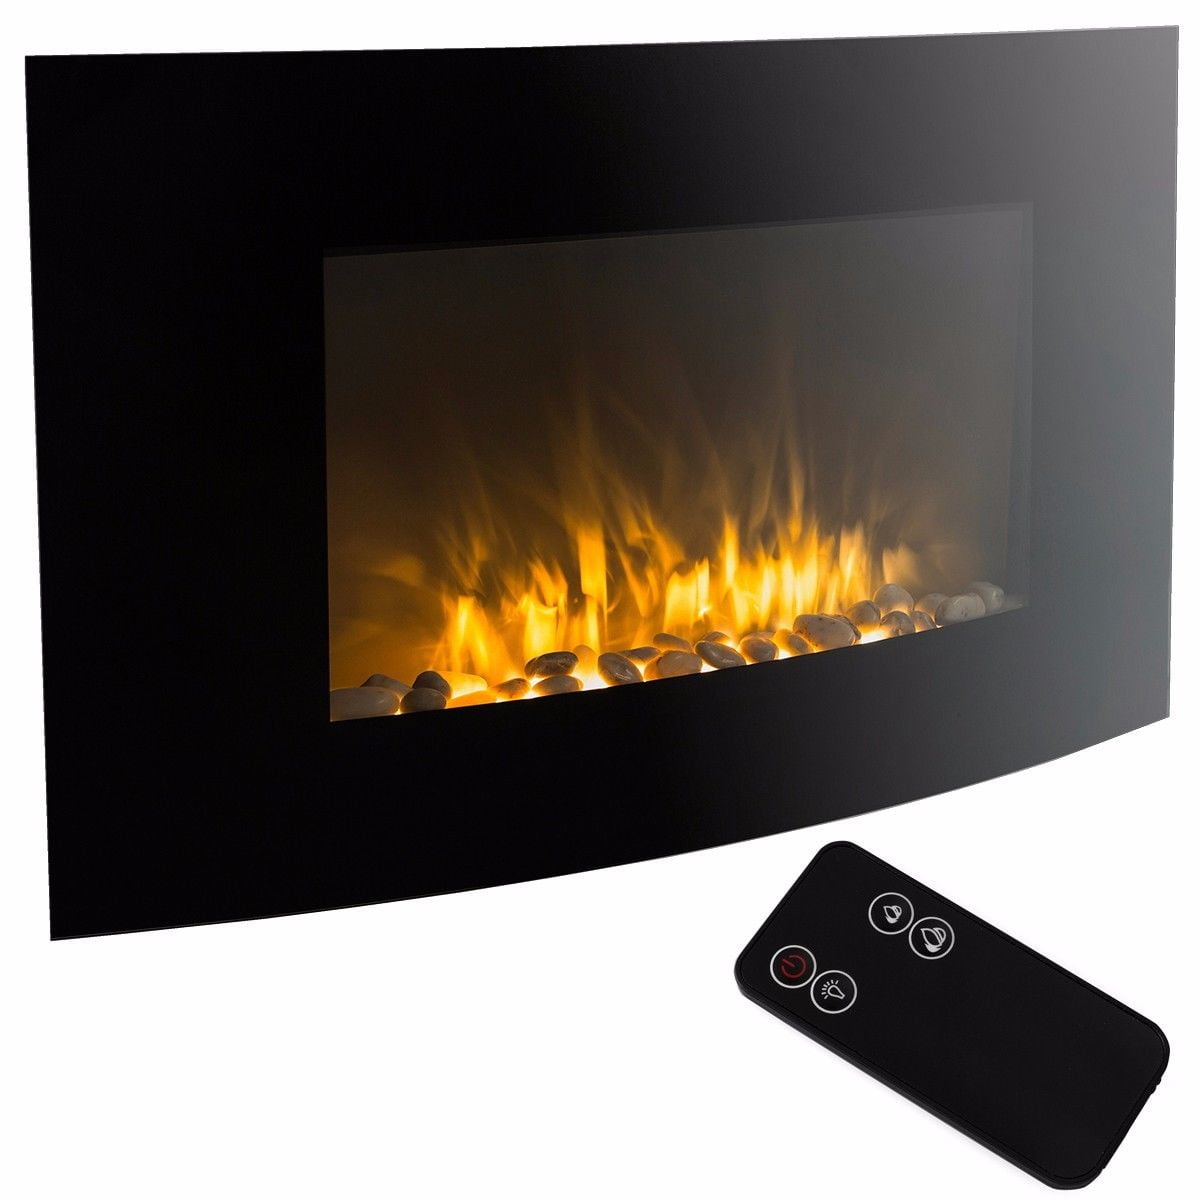 Barton 35 Electric Fireplace 1500w, 35 In Stainless Steel Electric Fireplace With Wall Mount And Remote Silver